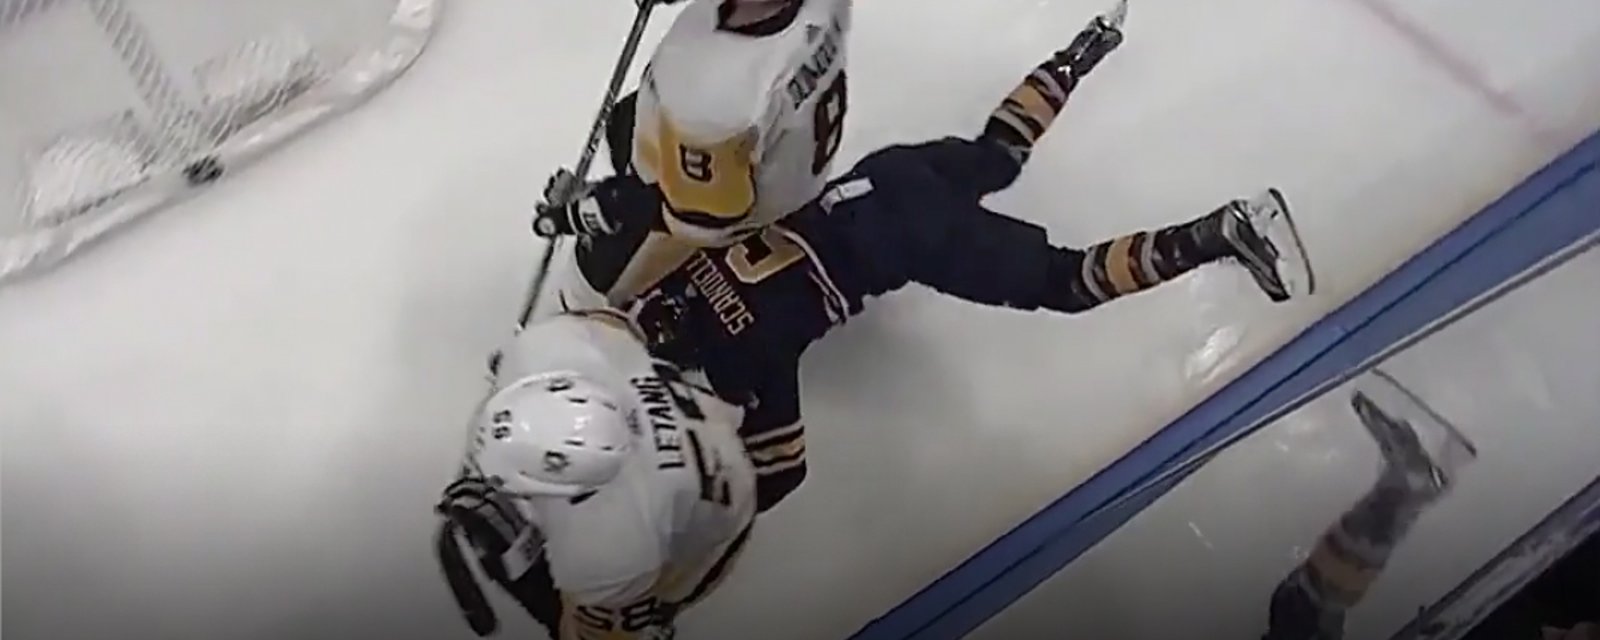 Must see: Sabres player completely misses hit, lands on his face